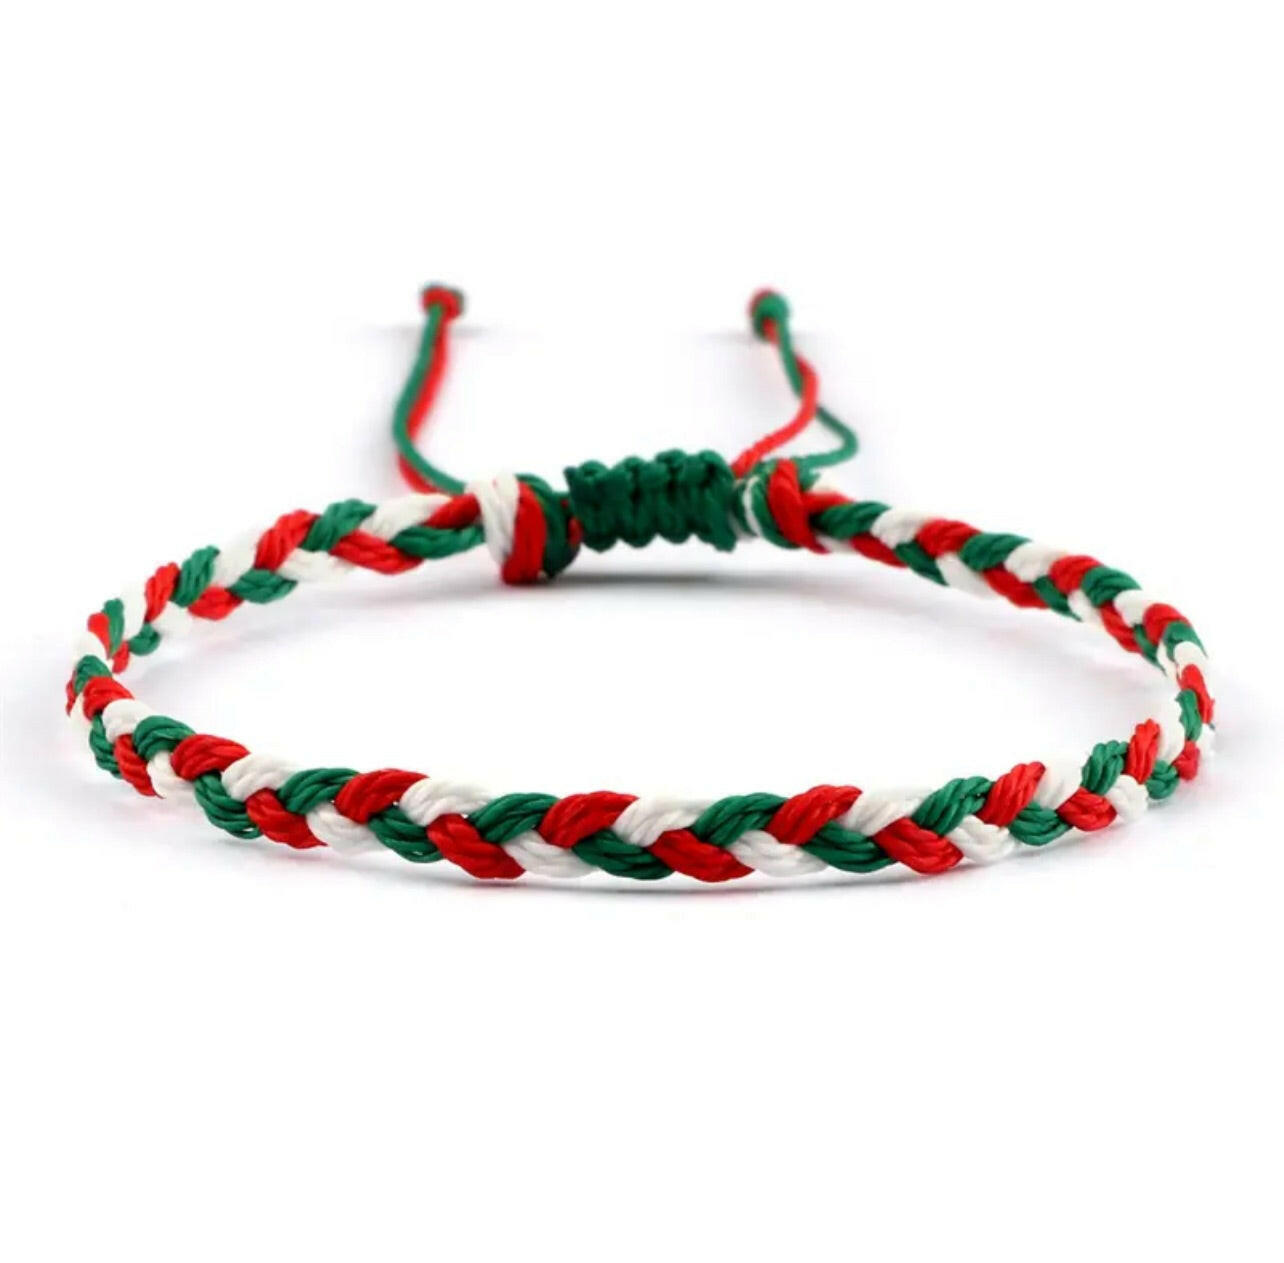 Italian hand-made braided bracelet in green, white and red.